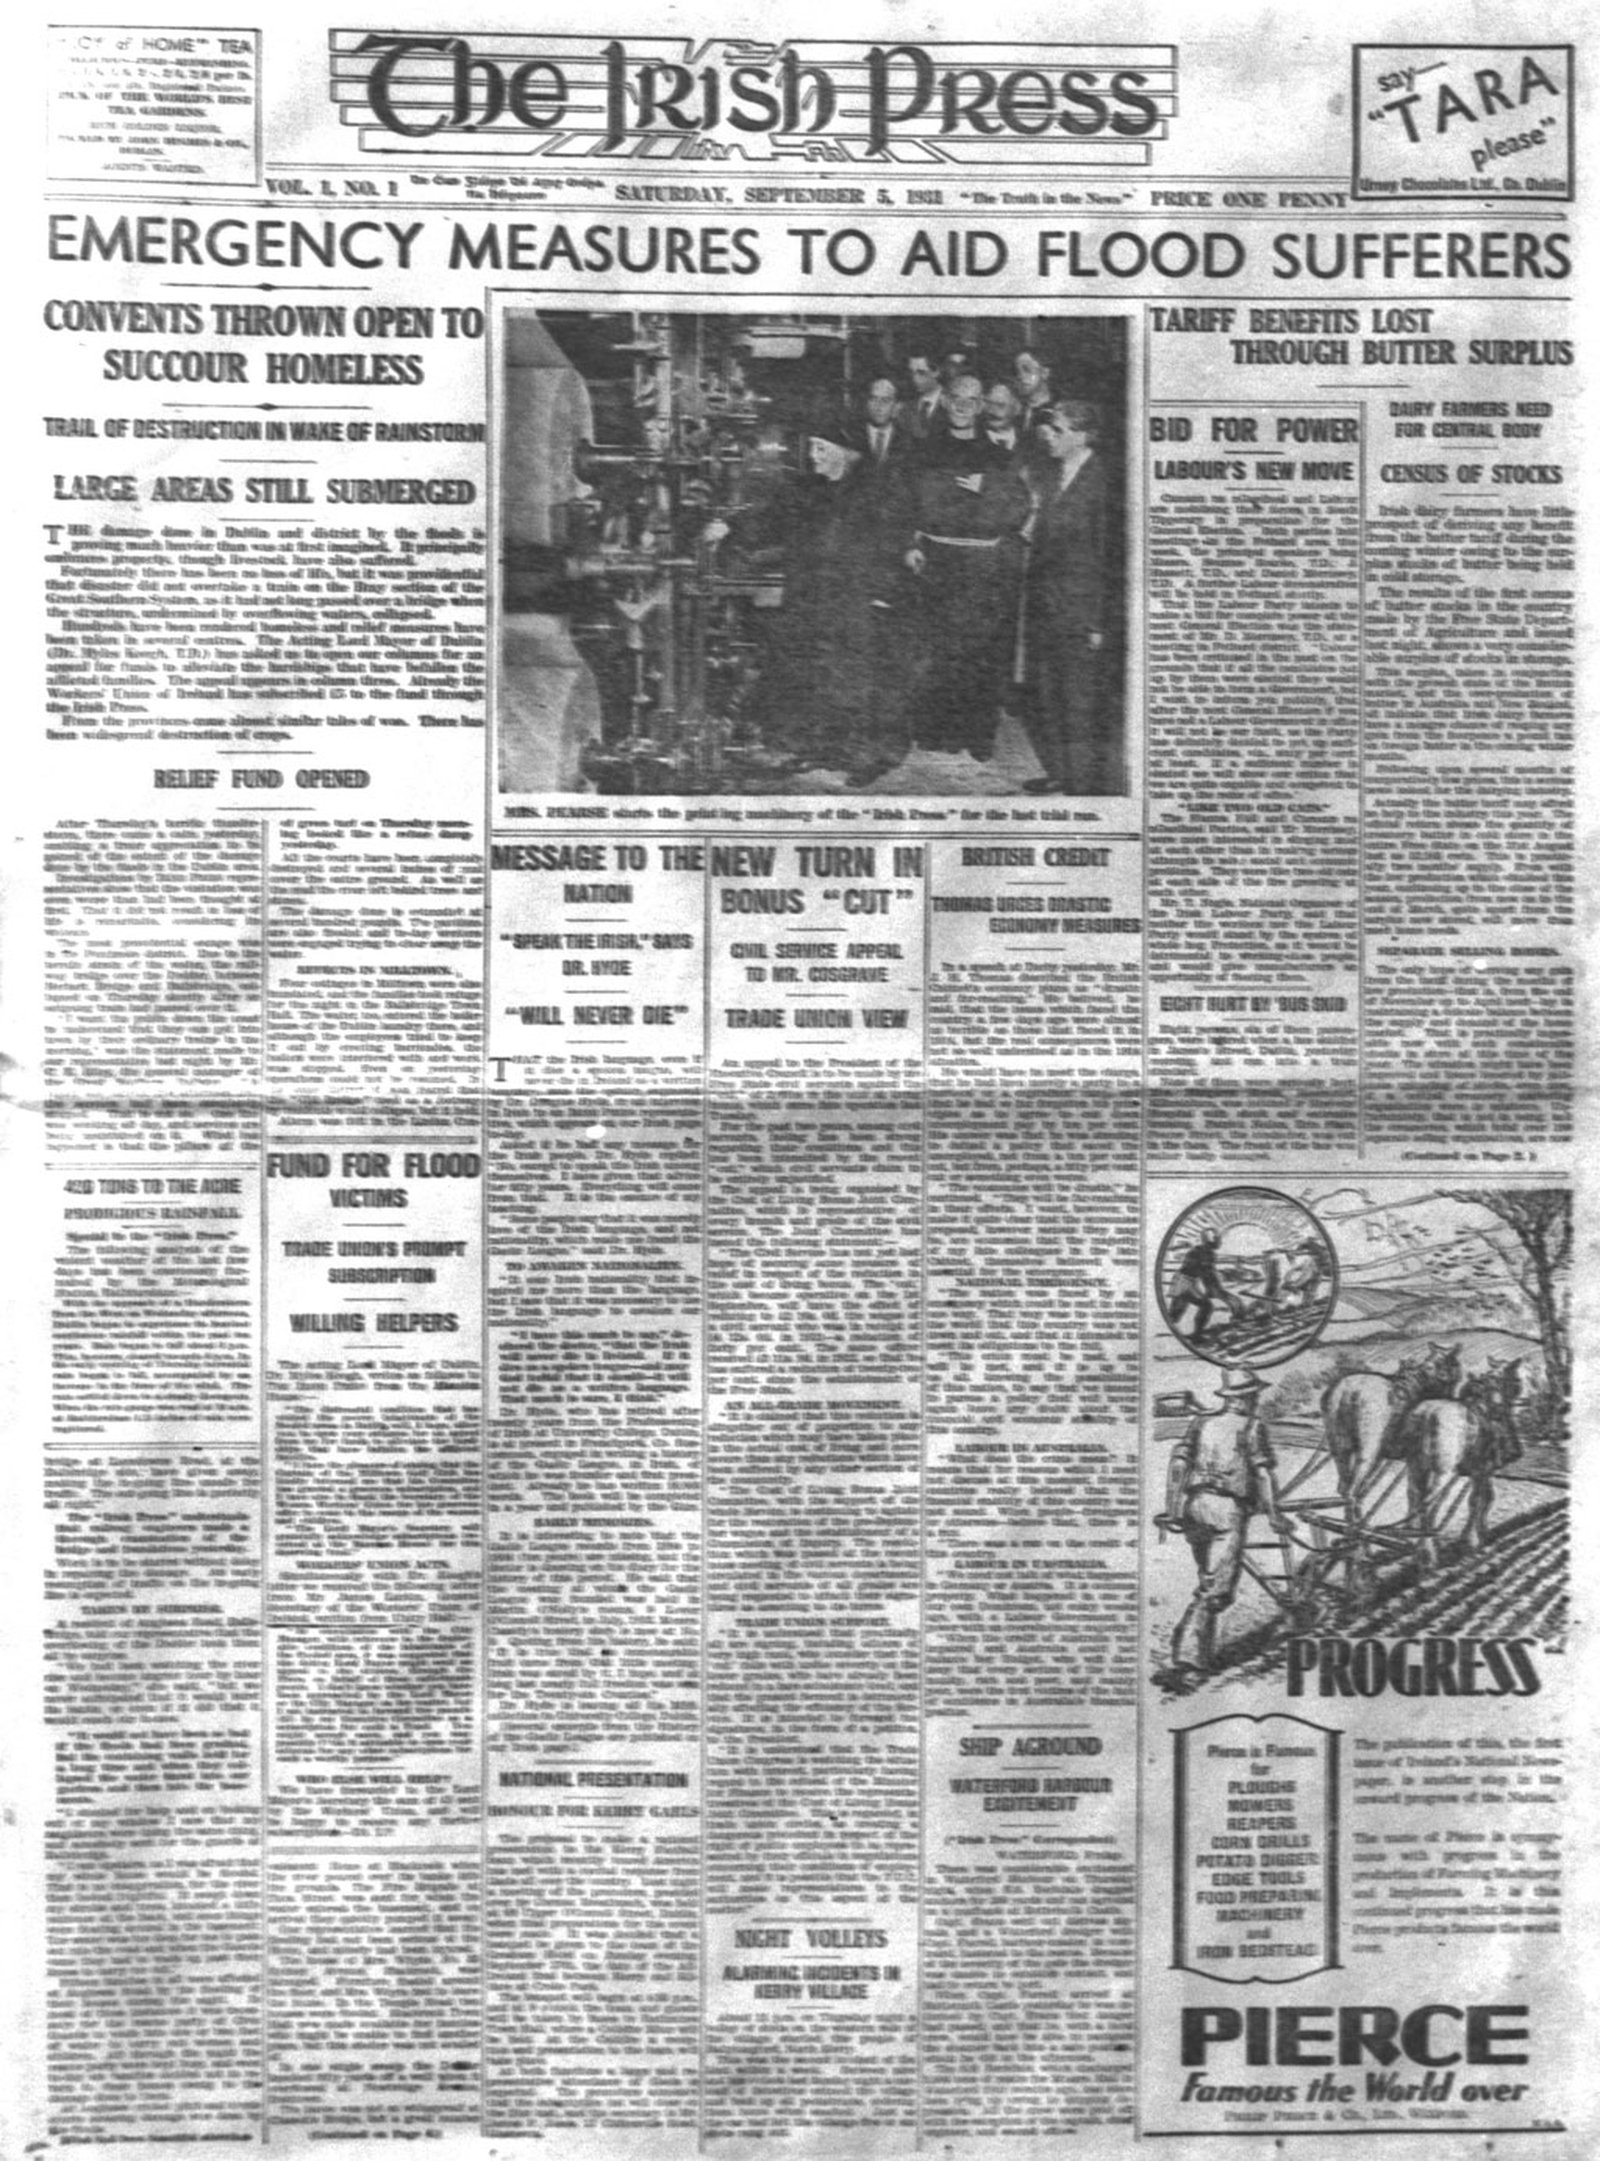 Image - The first edition of the Irish Press, partly funded by the money raised by De Valera in the U.S.